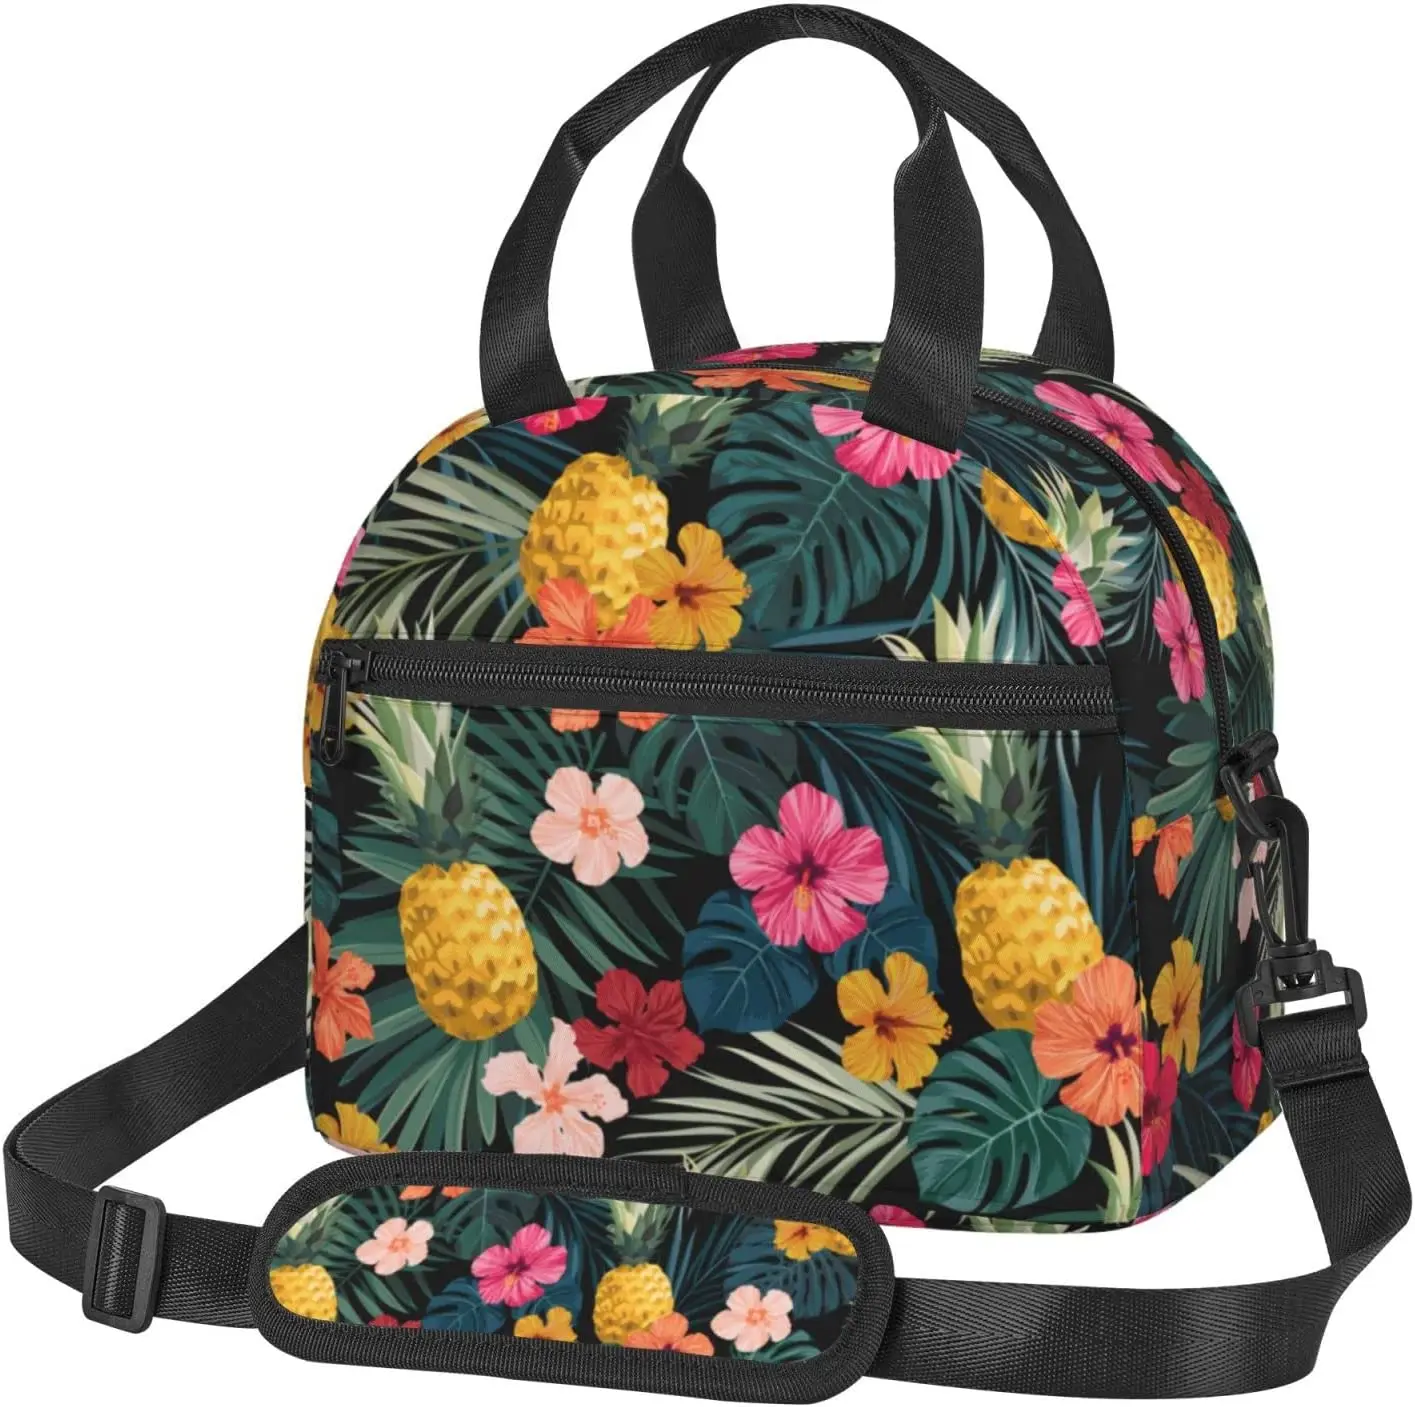 

Palm Leaves Hibiscus Flowers Lunch Bag Tropical Pineapples Fruit Reusable Insulated Lunch Tote Bag Lunchbox Container School